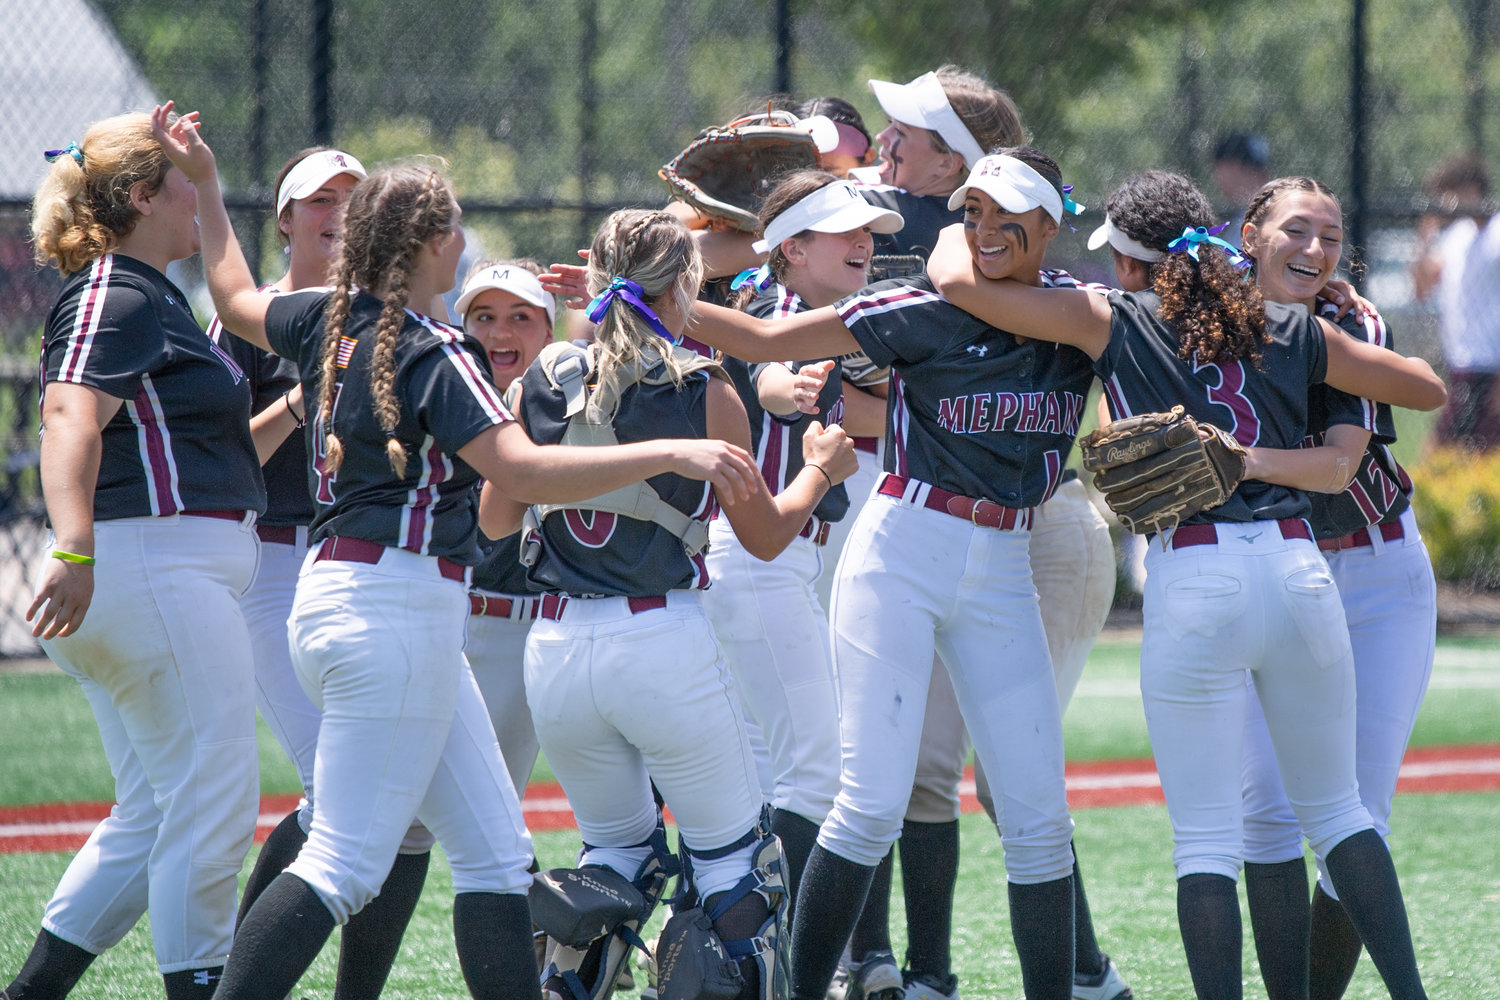 Mepham defeated East Islip, 8-3, on Saturday at Moriches Sports Complex for its second straight Long Island Class A softball championship.